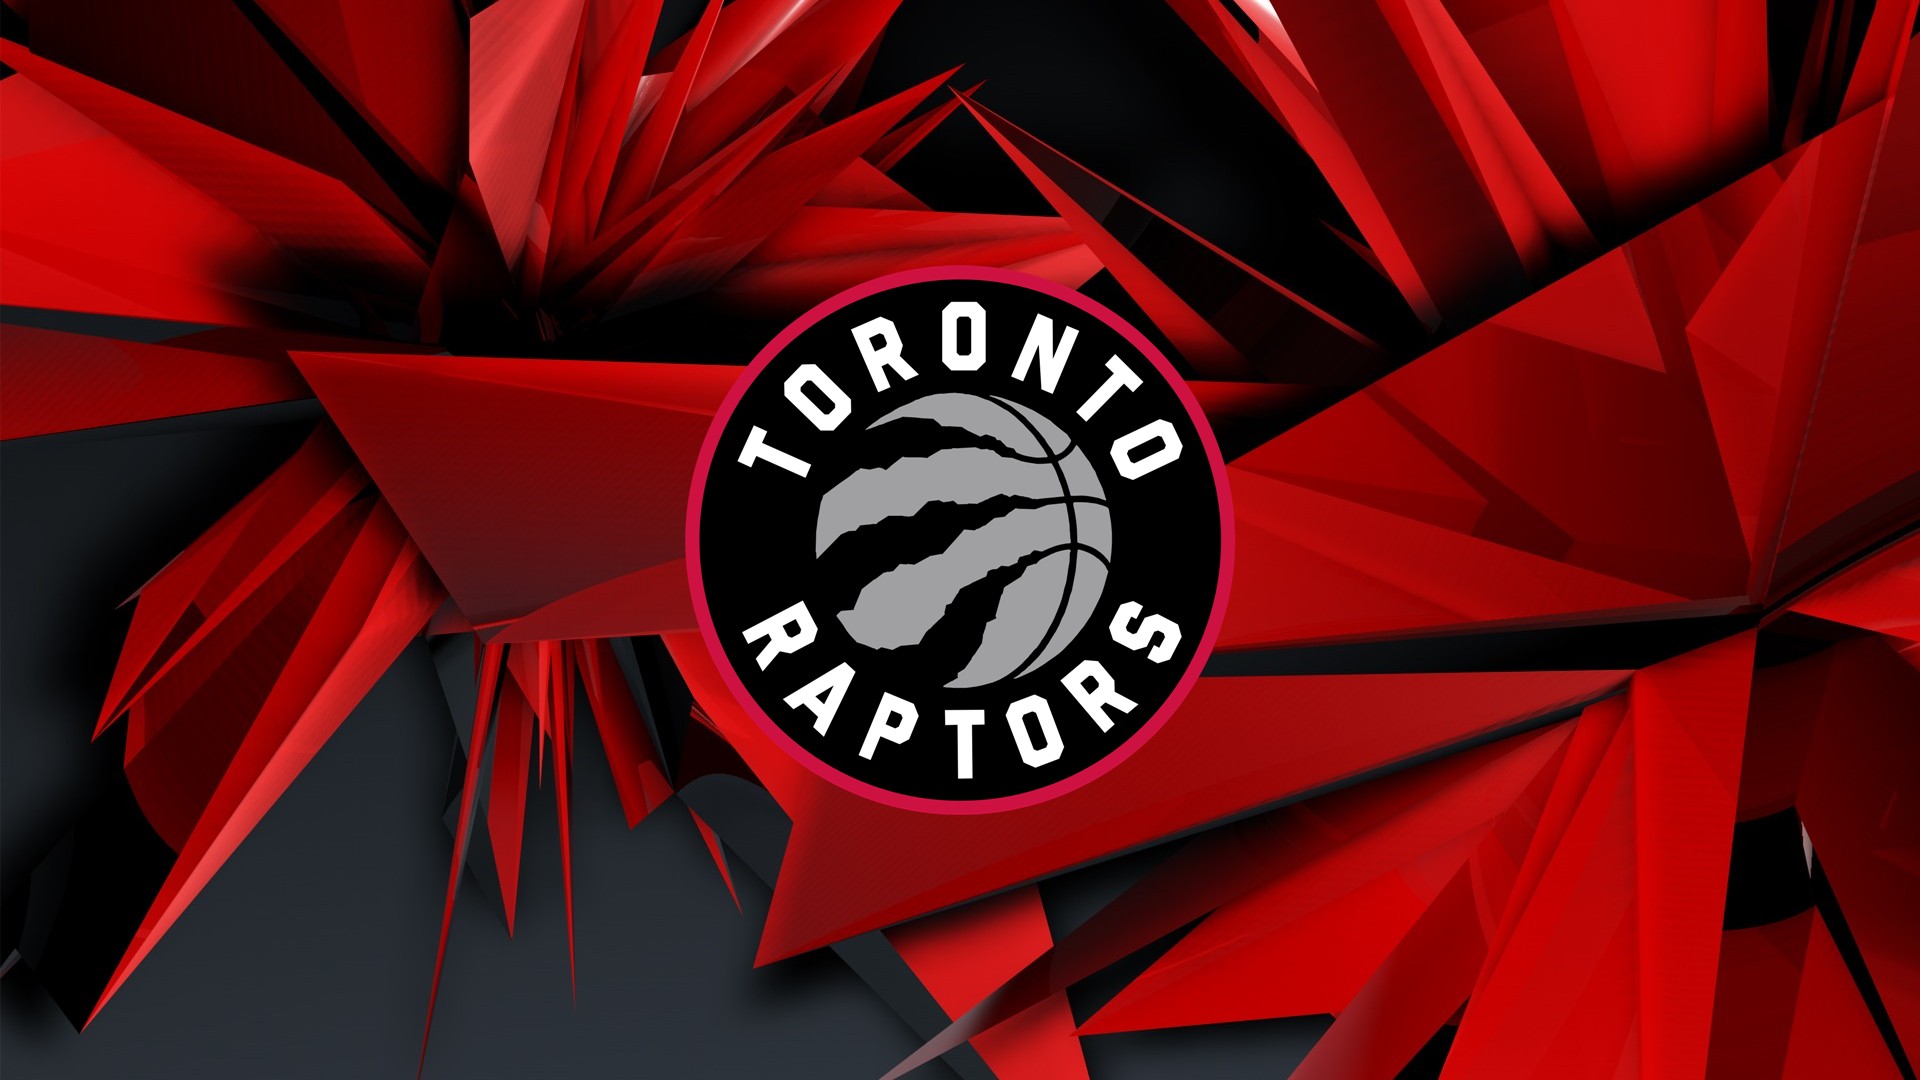 Toronto Raptors Logo For Desktop Wallpaper with high-resolution 1920x1080 pixel. You can use this wallpaper for your Desktop Computer Backgrounds, Windows or Mac Screensavers, iPhone Lock screen, Tablet or Android and another Mobile Phone device